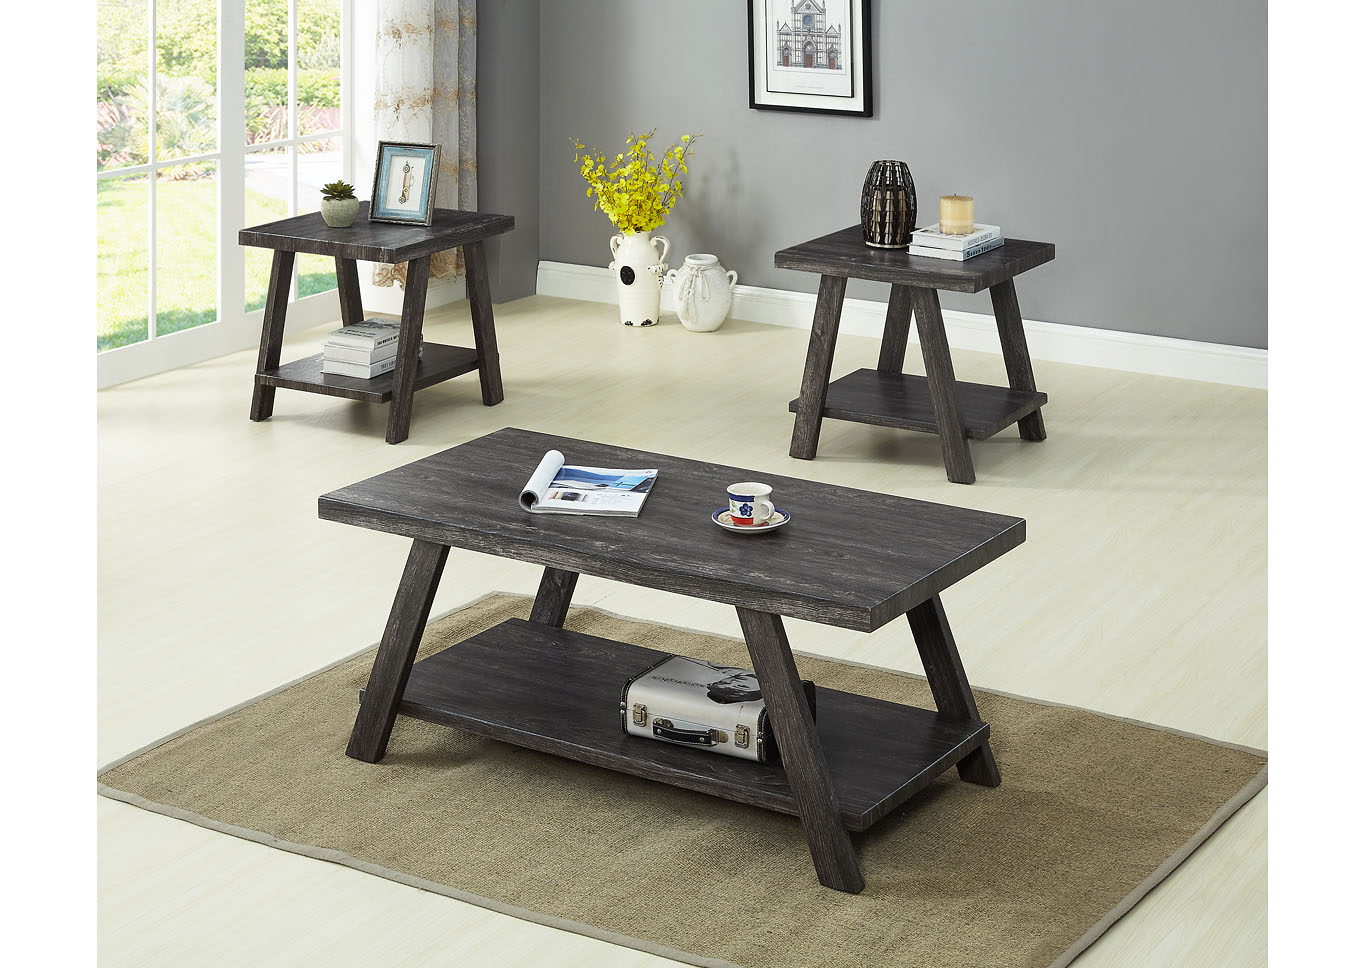 Grey 3 Piece Coffee & End Table Set,Global Trading